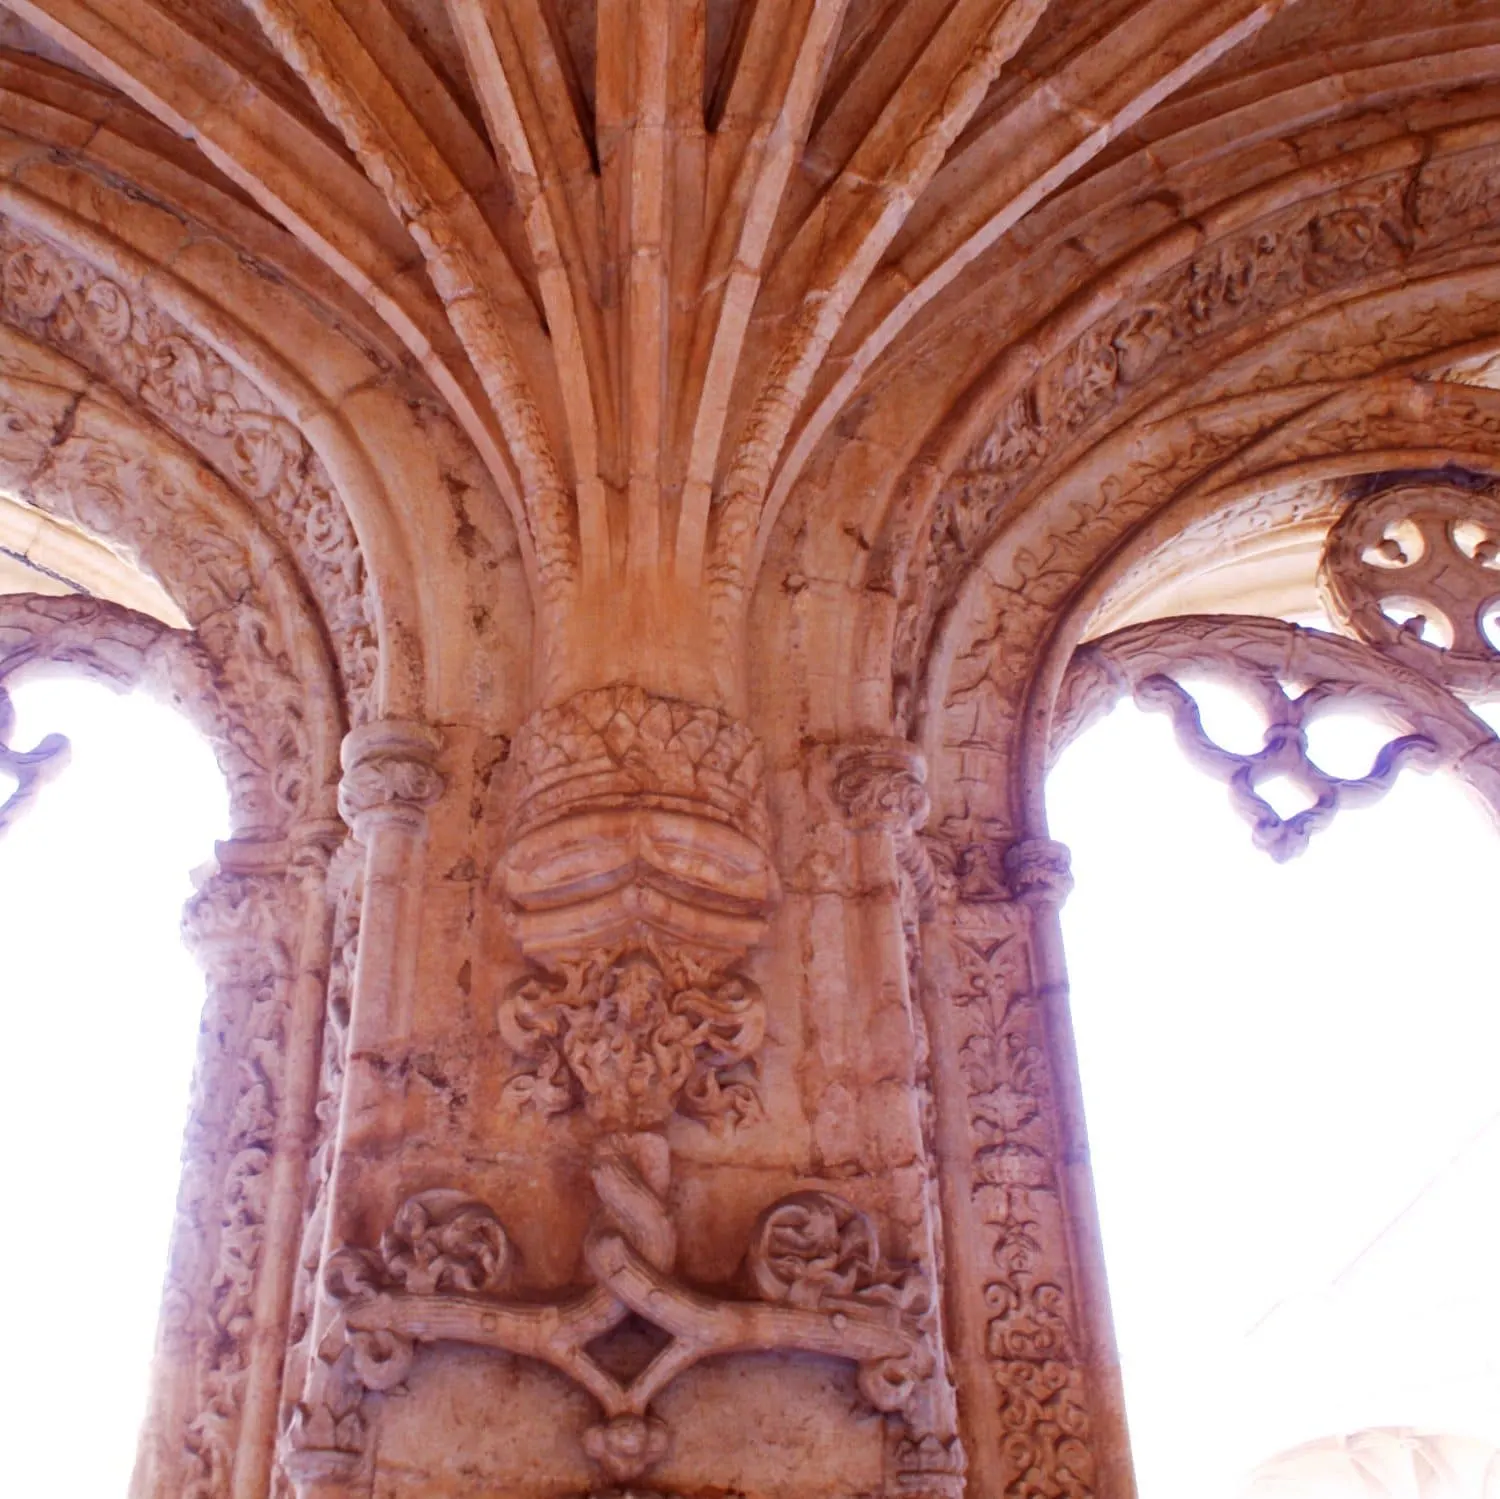 Arches in the cloisters at San Jeronimos Monastery